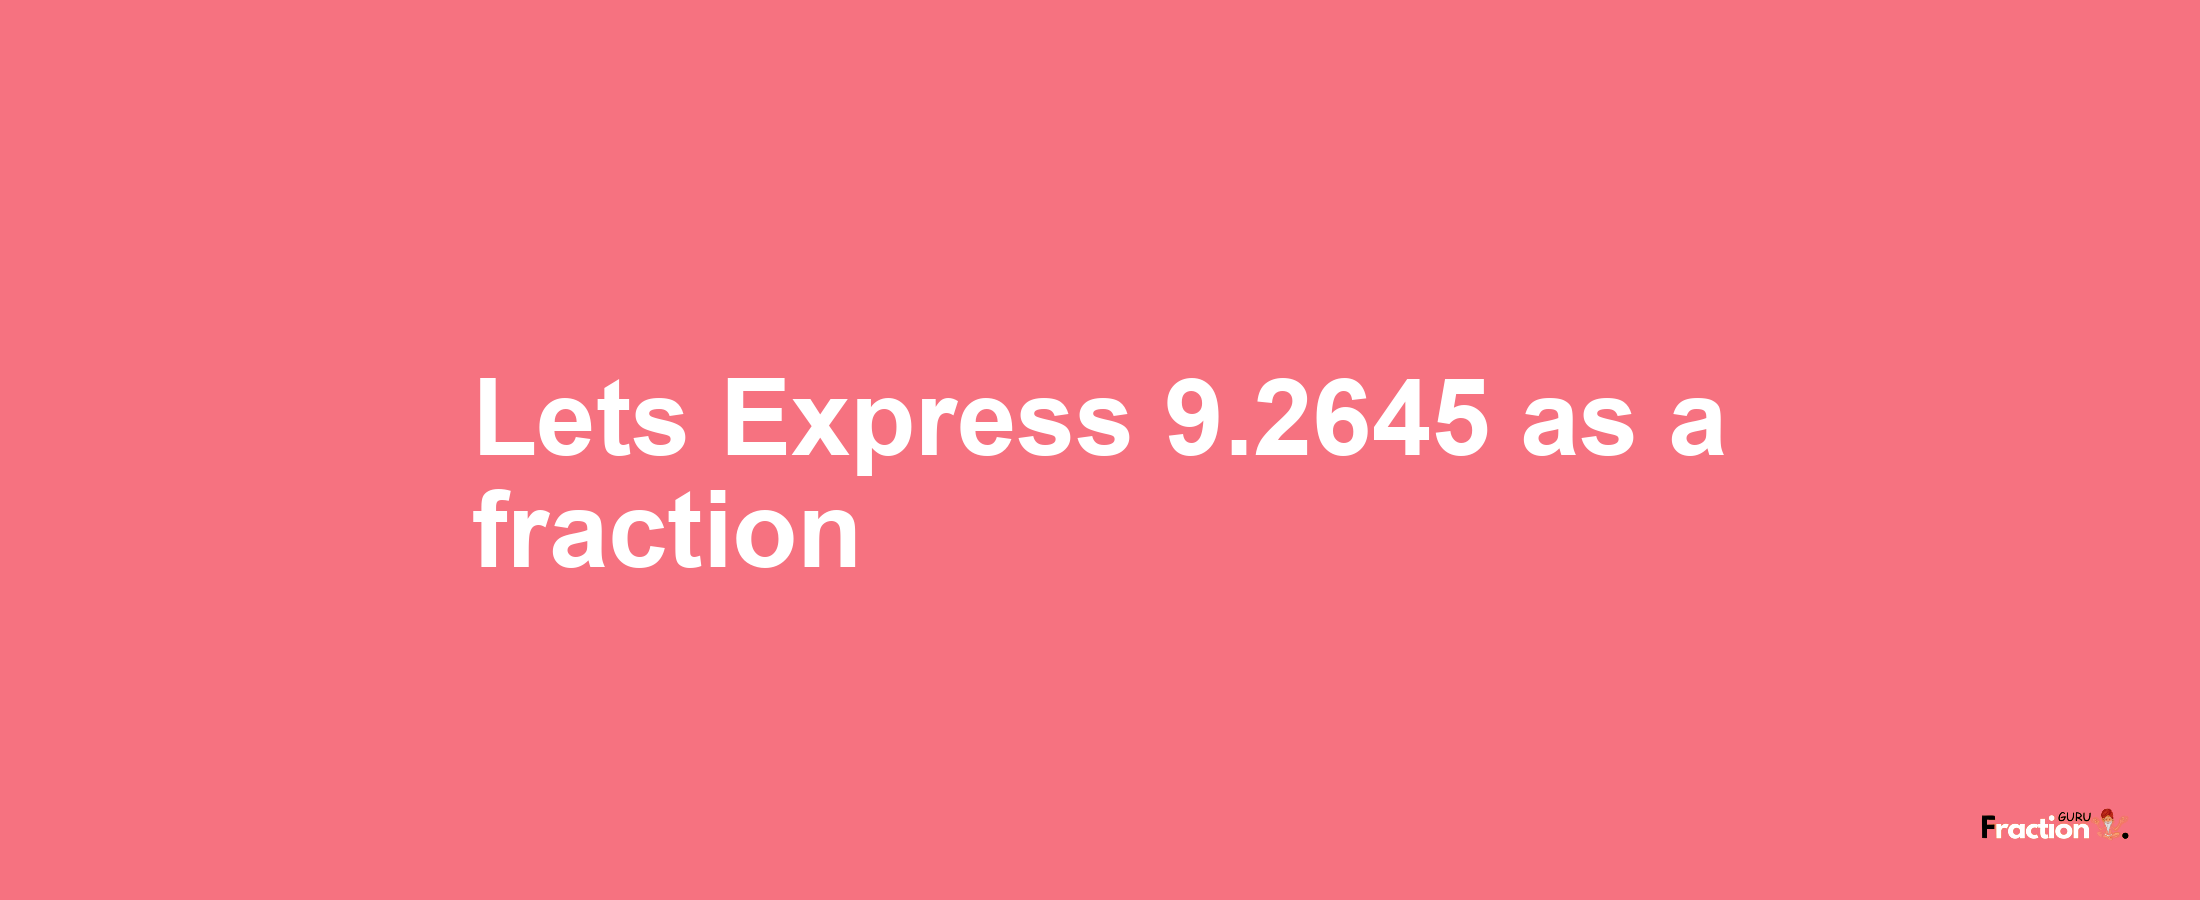 Lets Express 9.2645 as afraction